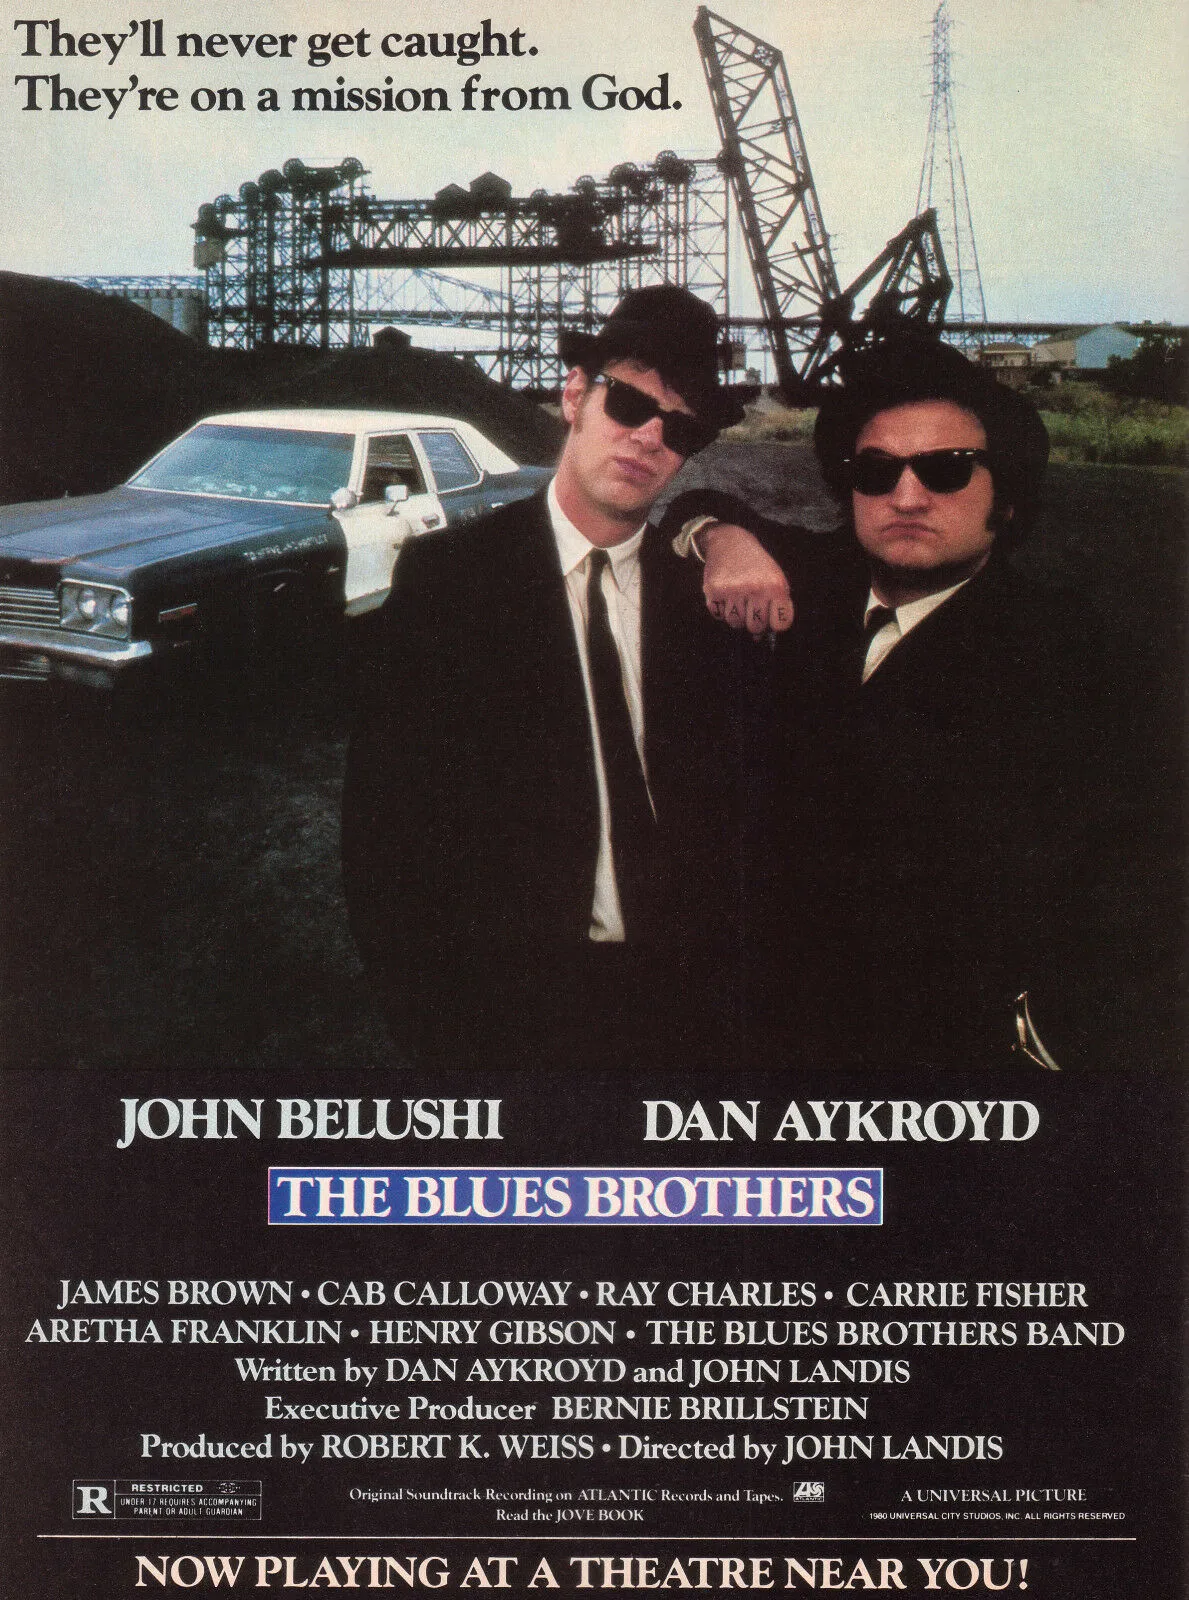 THE BLUES BROTHERS Paintings Art Film Print Silk Poster Home Wall Decor 60x90cm